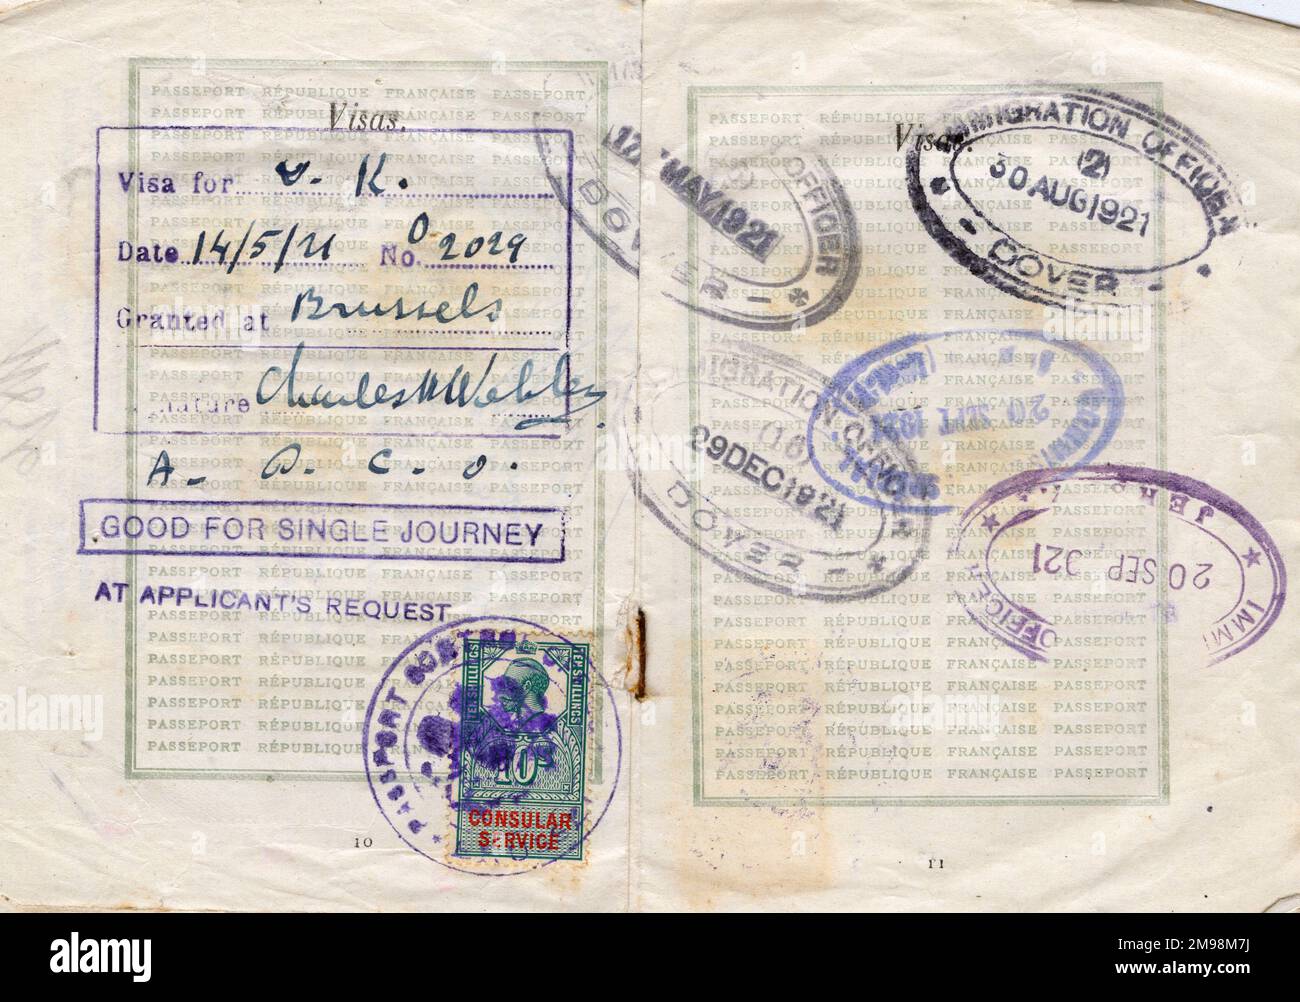 Visa pages with stamps in a French passport valid for one year from 15 March 1921, belonging to Mlle Henriette Stephanie Pannier, student. The stamps are from Dover and Jersey. Stock Photo